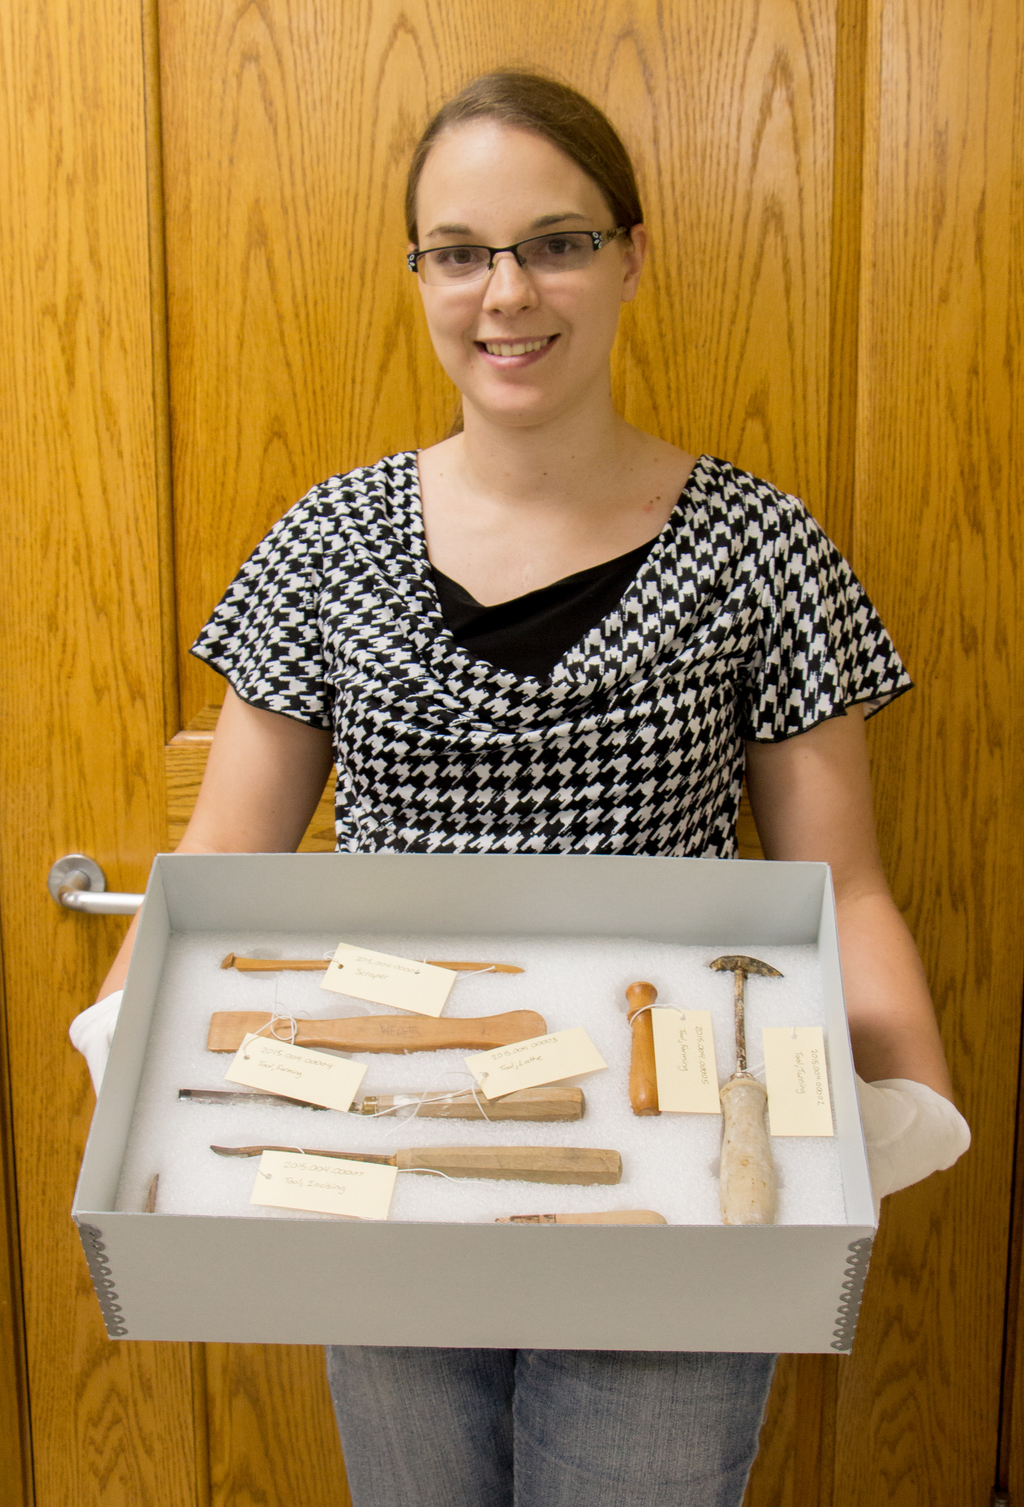 Jodi Birch poses with a set of tools once owned by William Artis.